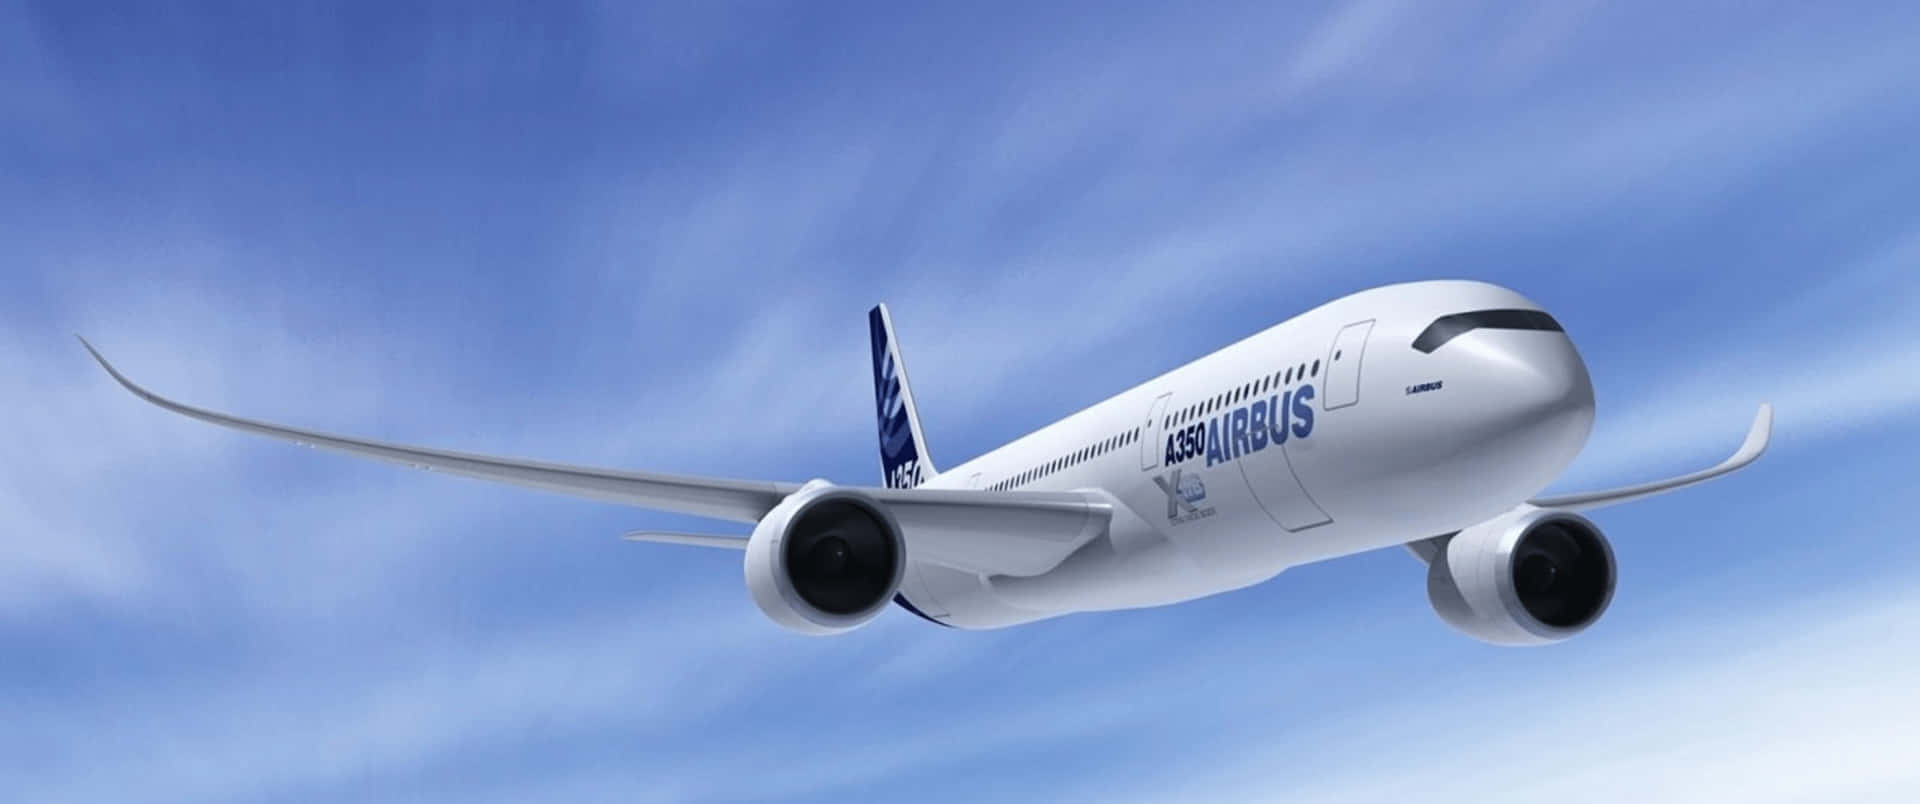 3440x1440p Plane Airbus A350 1000 Background